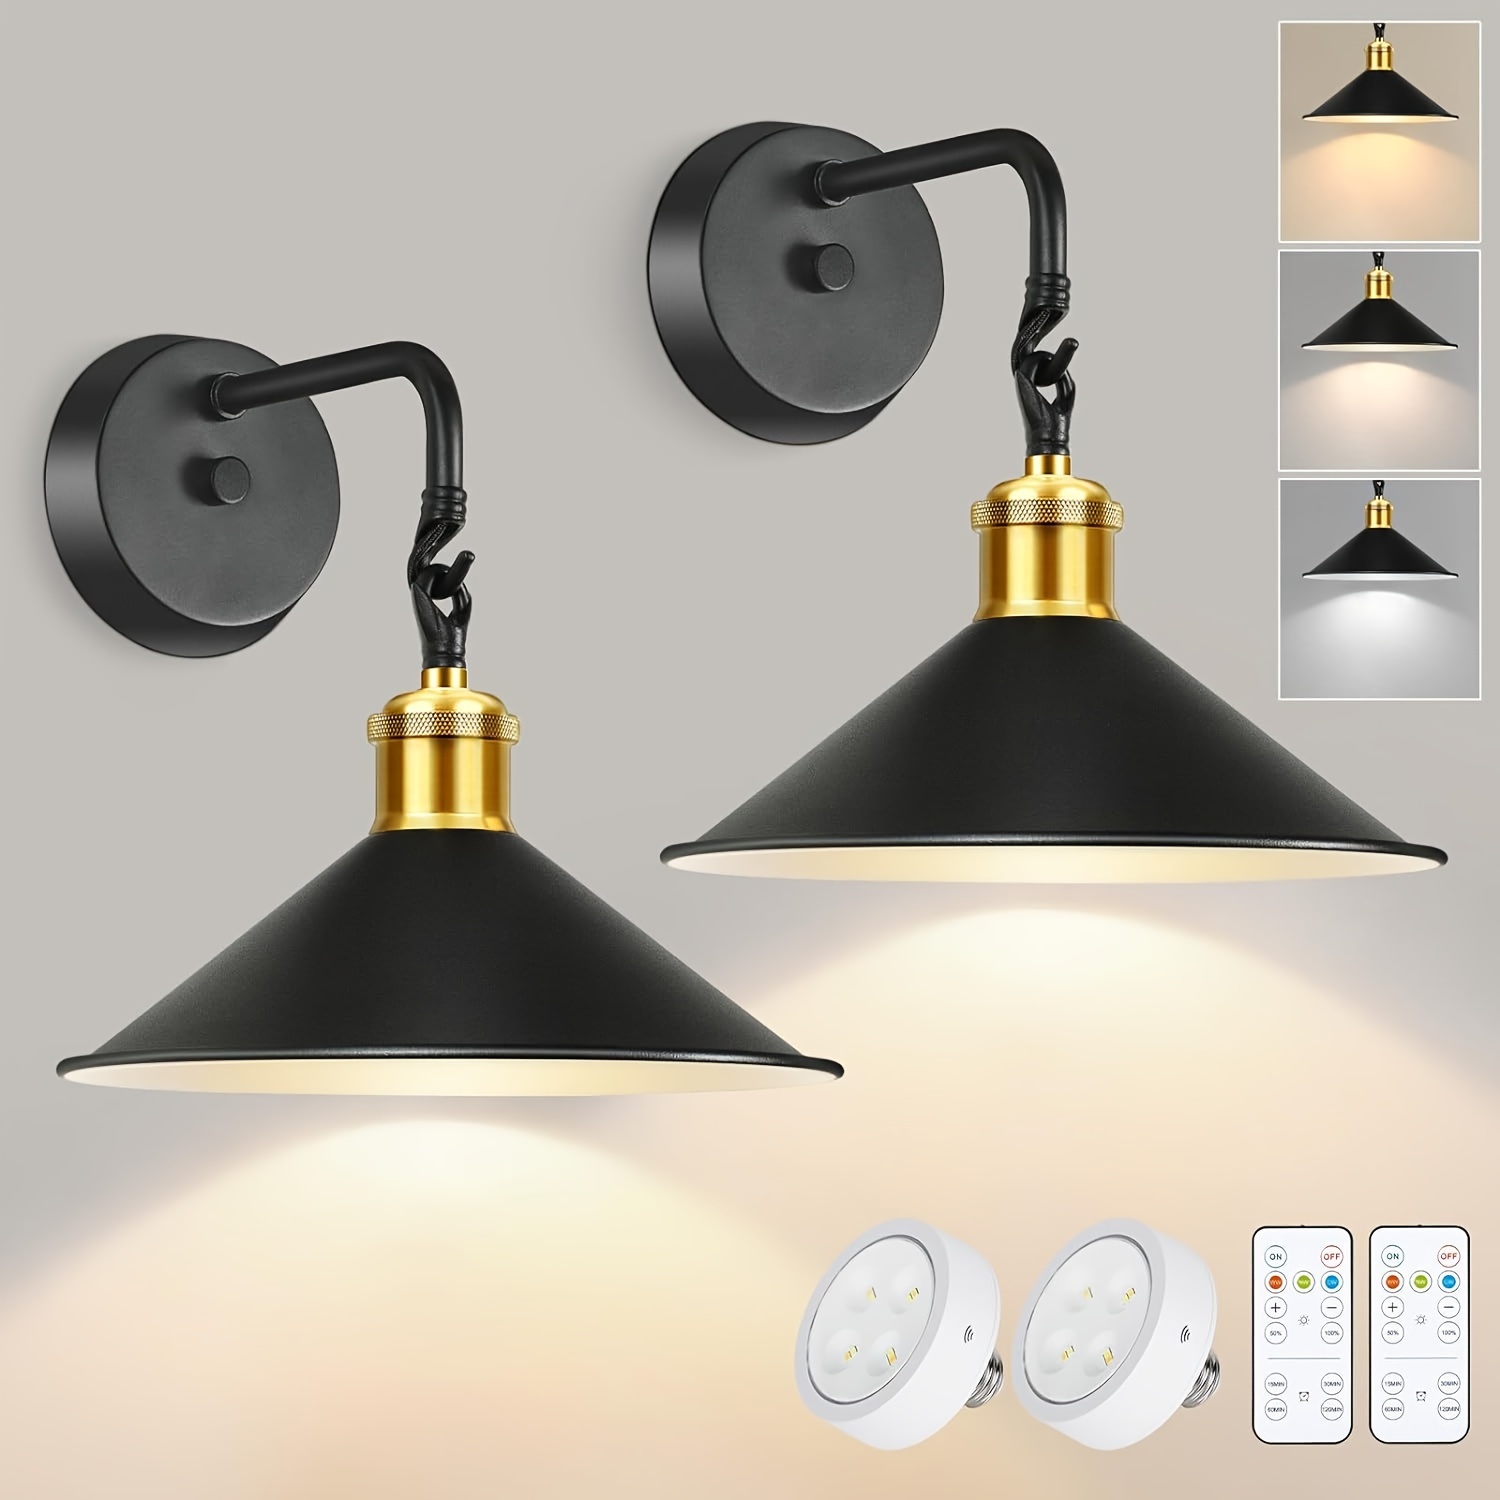 

Set Of 2 Battery Operated Wall Sconces With Remote, Dimmable Wireless Or Hardwired Indoor Wall Light Fixture, 3000k/4000k/6000k Adjustable Black Wall Lamp For Bedroom Living Room, 2 Led Bulbs Included